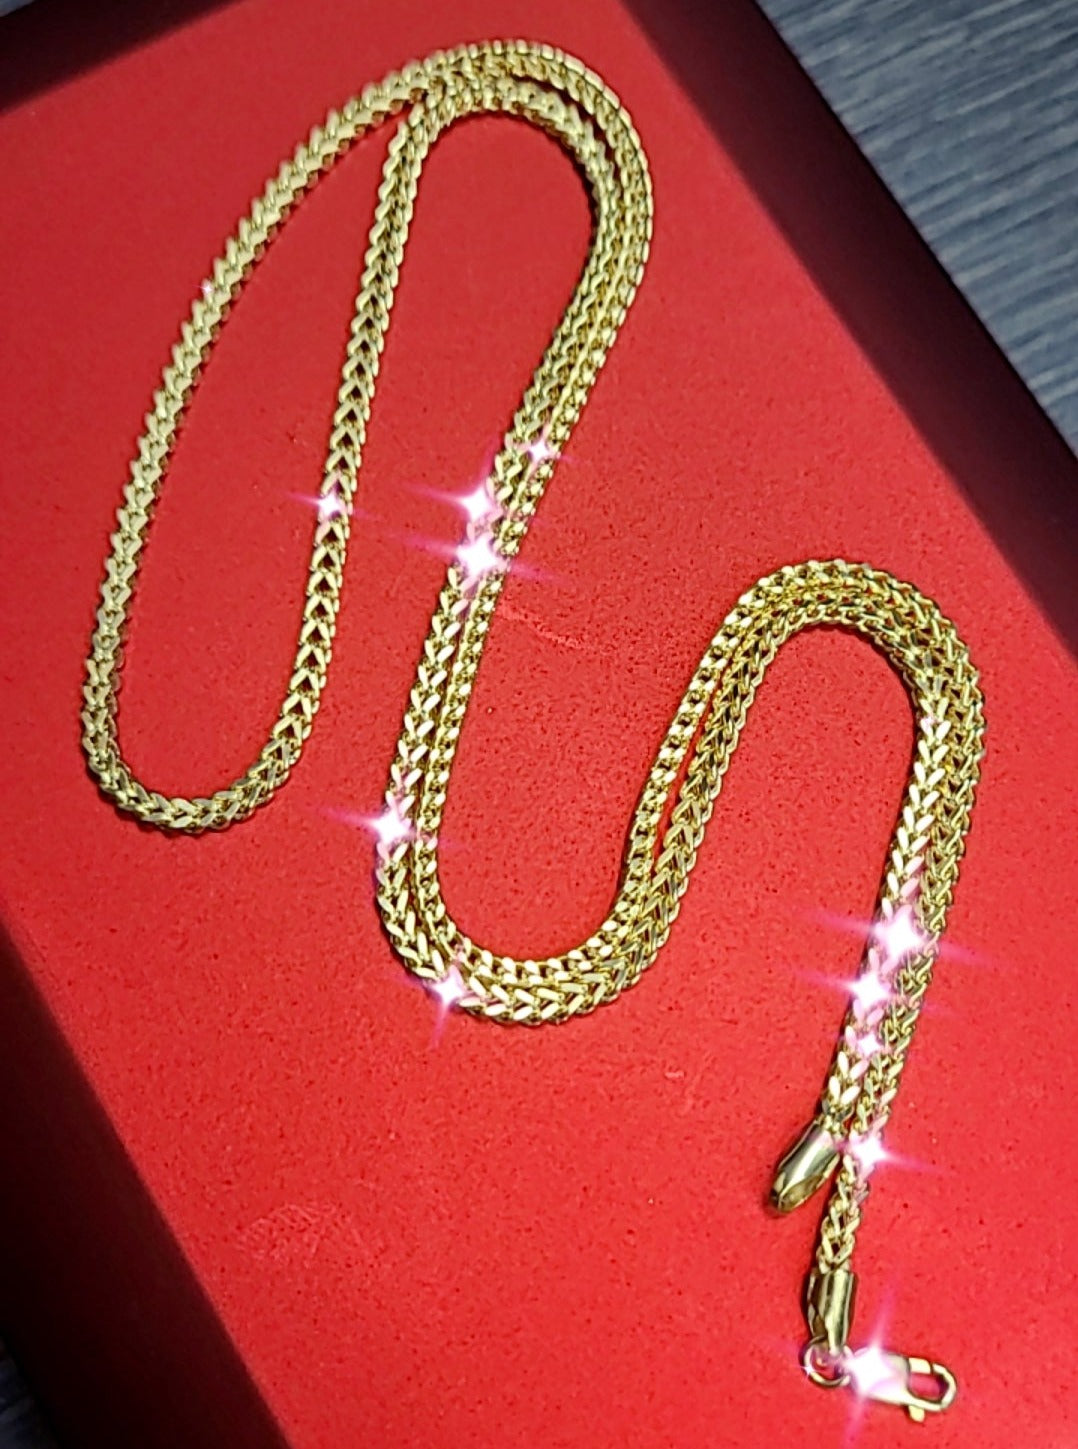 New! 22” 2.25mm 14K Yellow Gold Franco Link Box Chain Necklace 6.2g